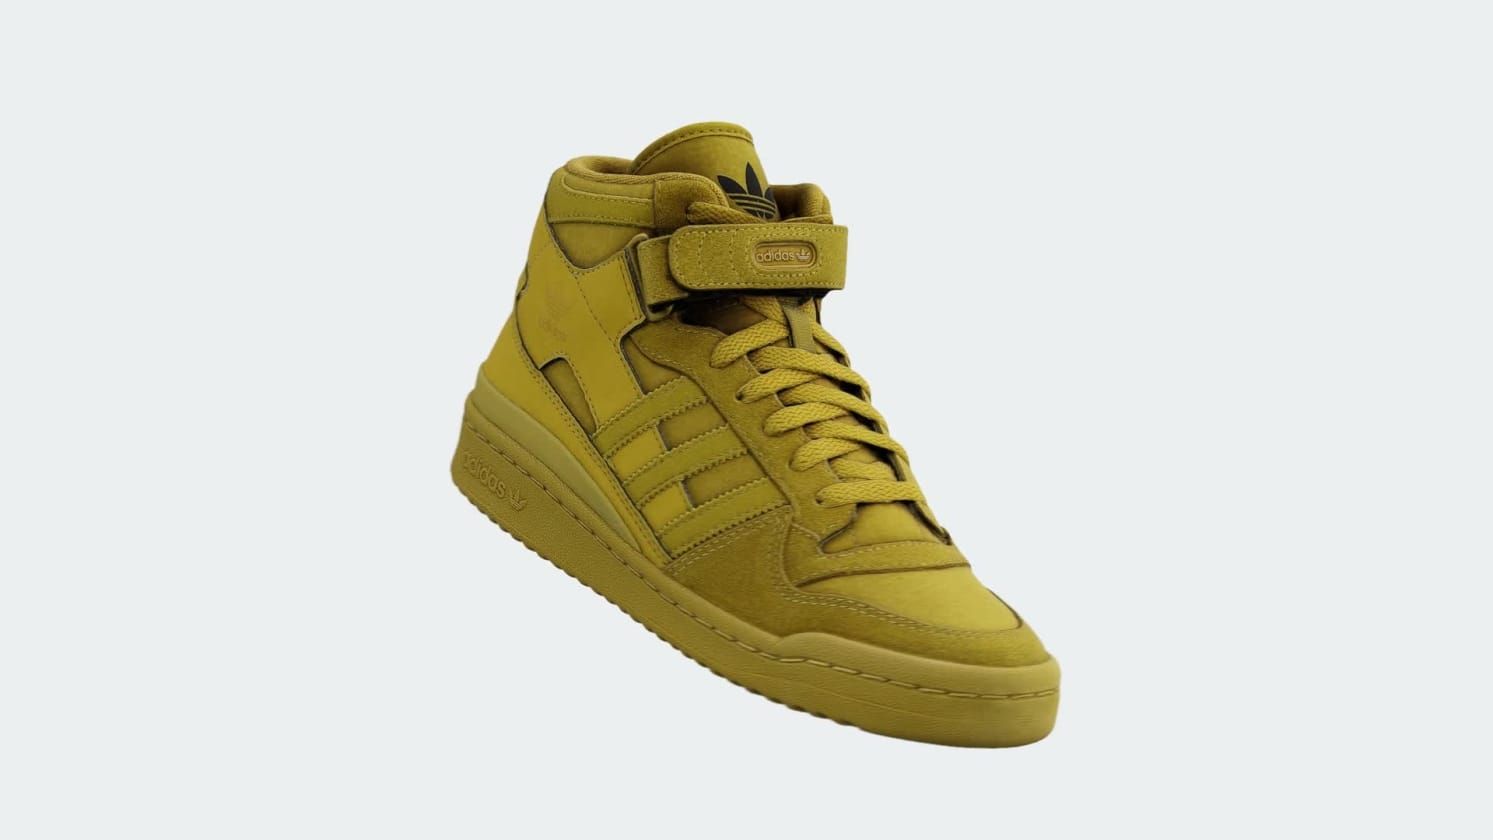 Forum Mid Shoes | adidas (US)